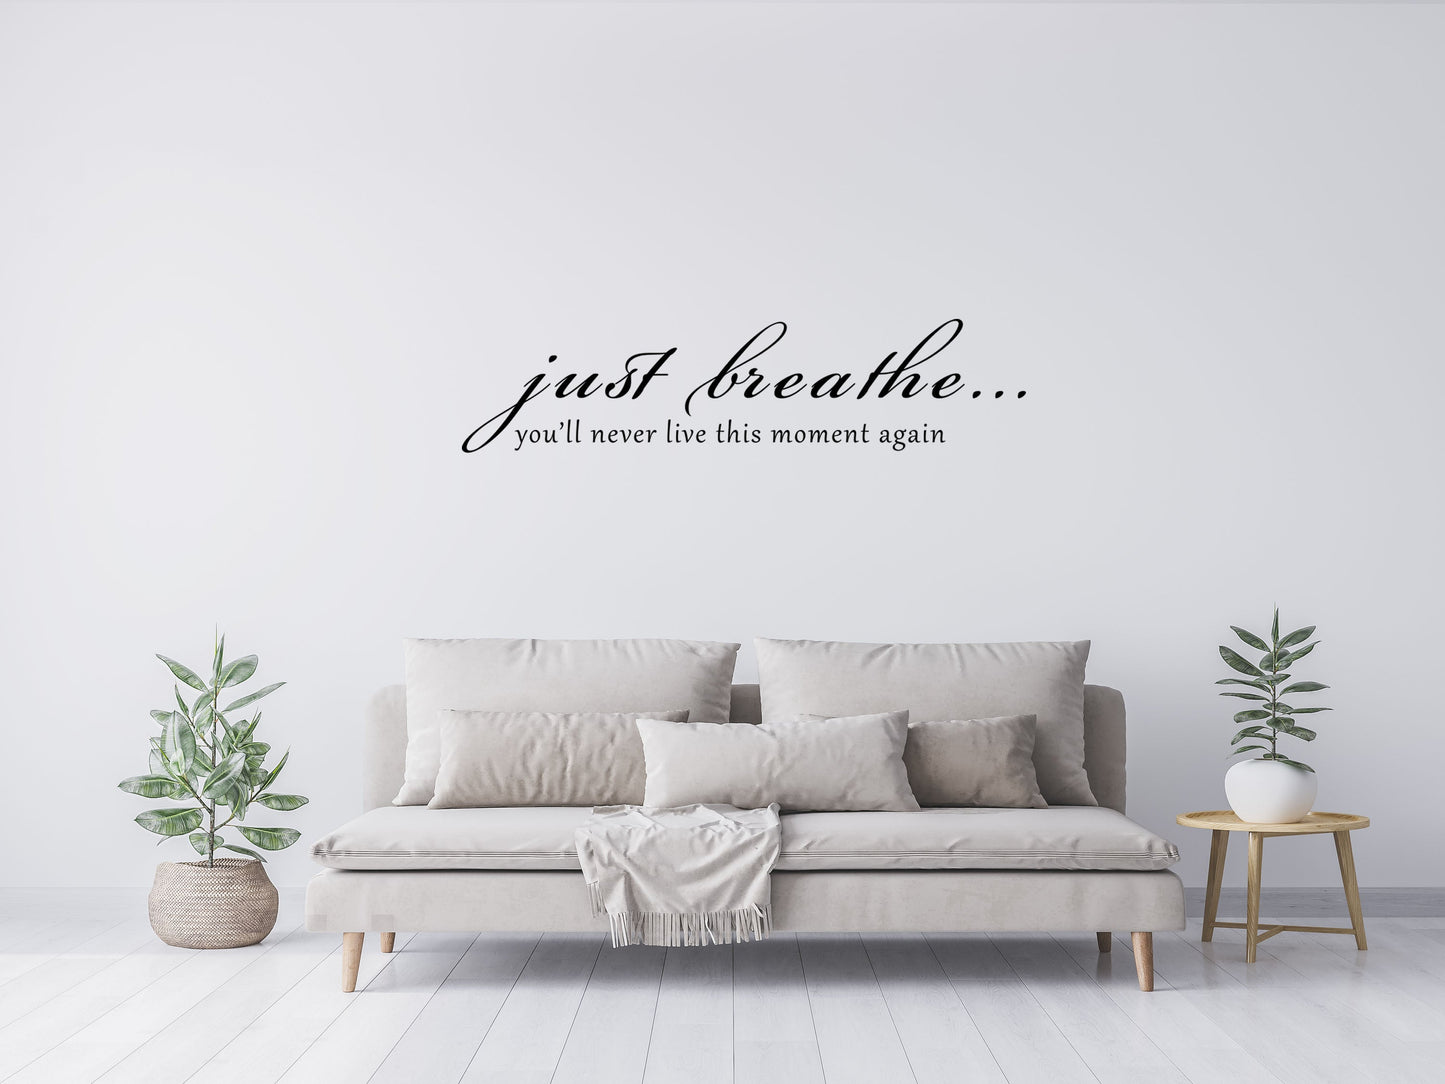 Just Breathe...You'll Never Live This Moment Again Bedroom Wall Word Decal Vinyl Wall Decal Inspirational Wall Signs 